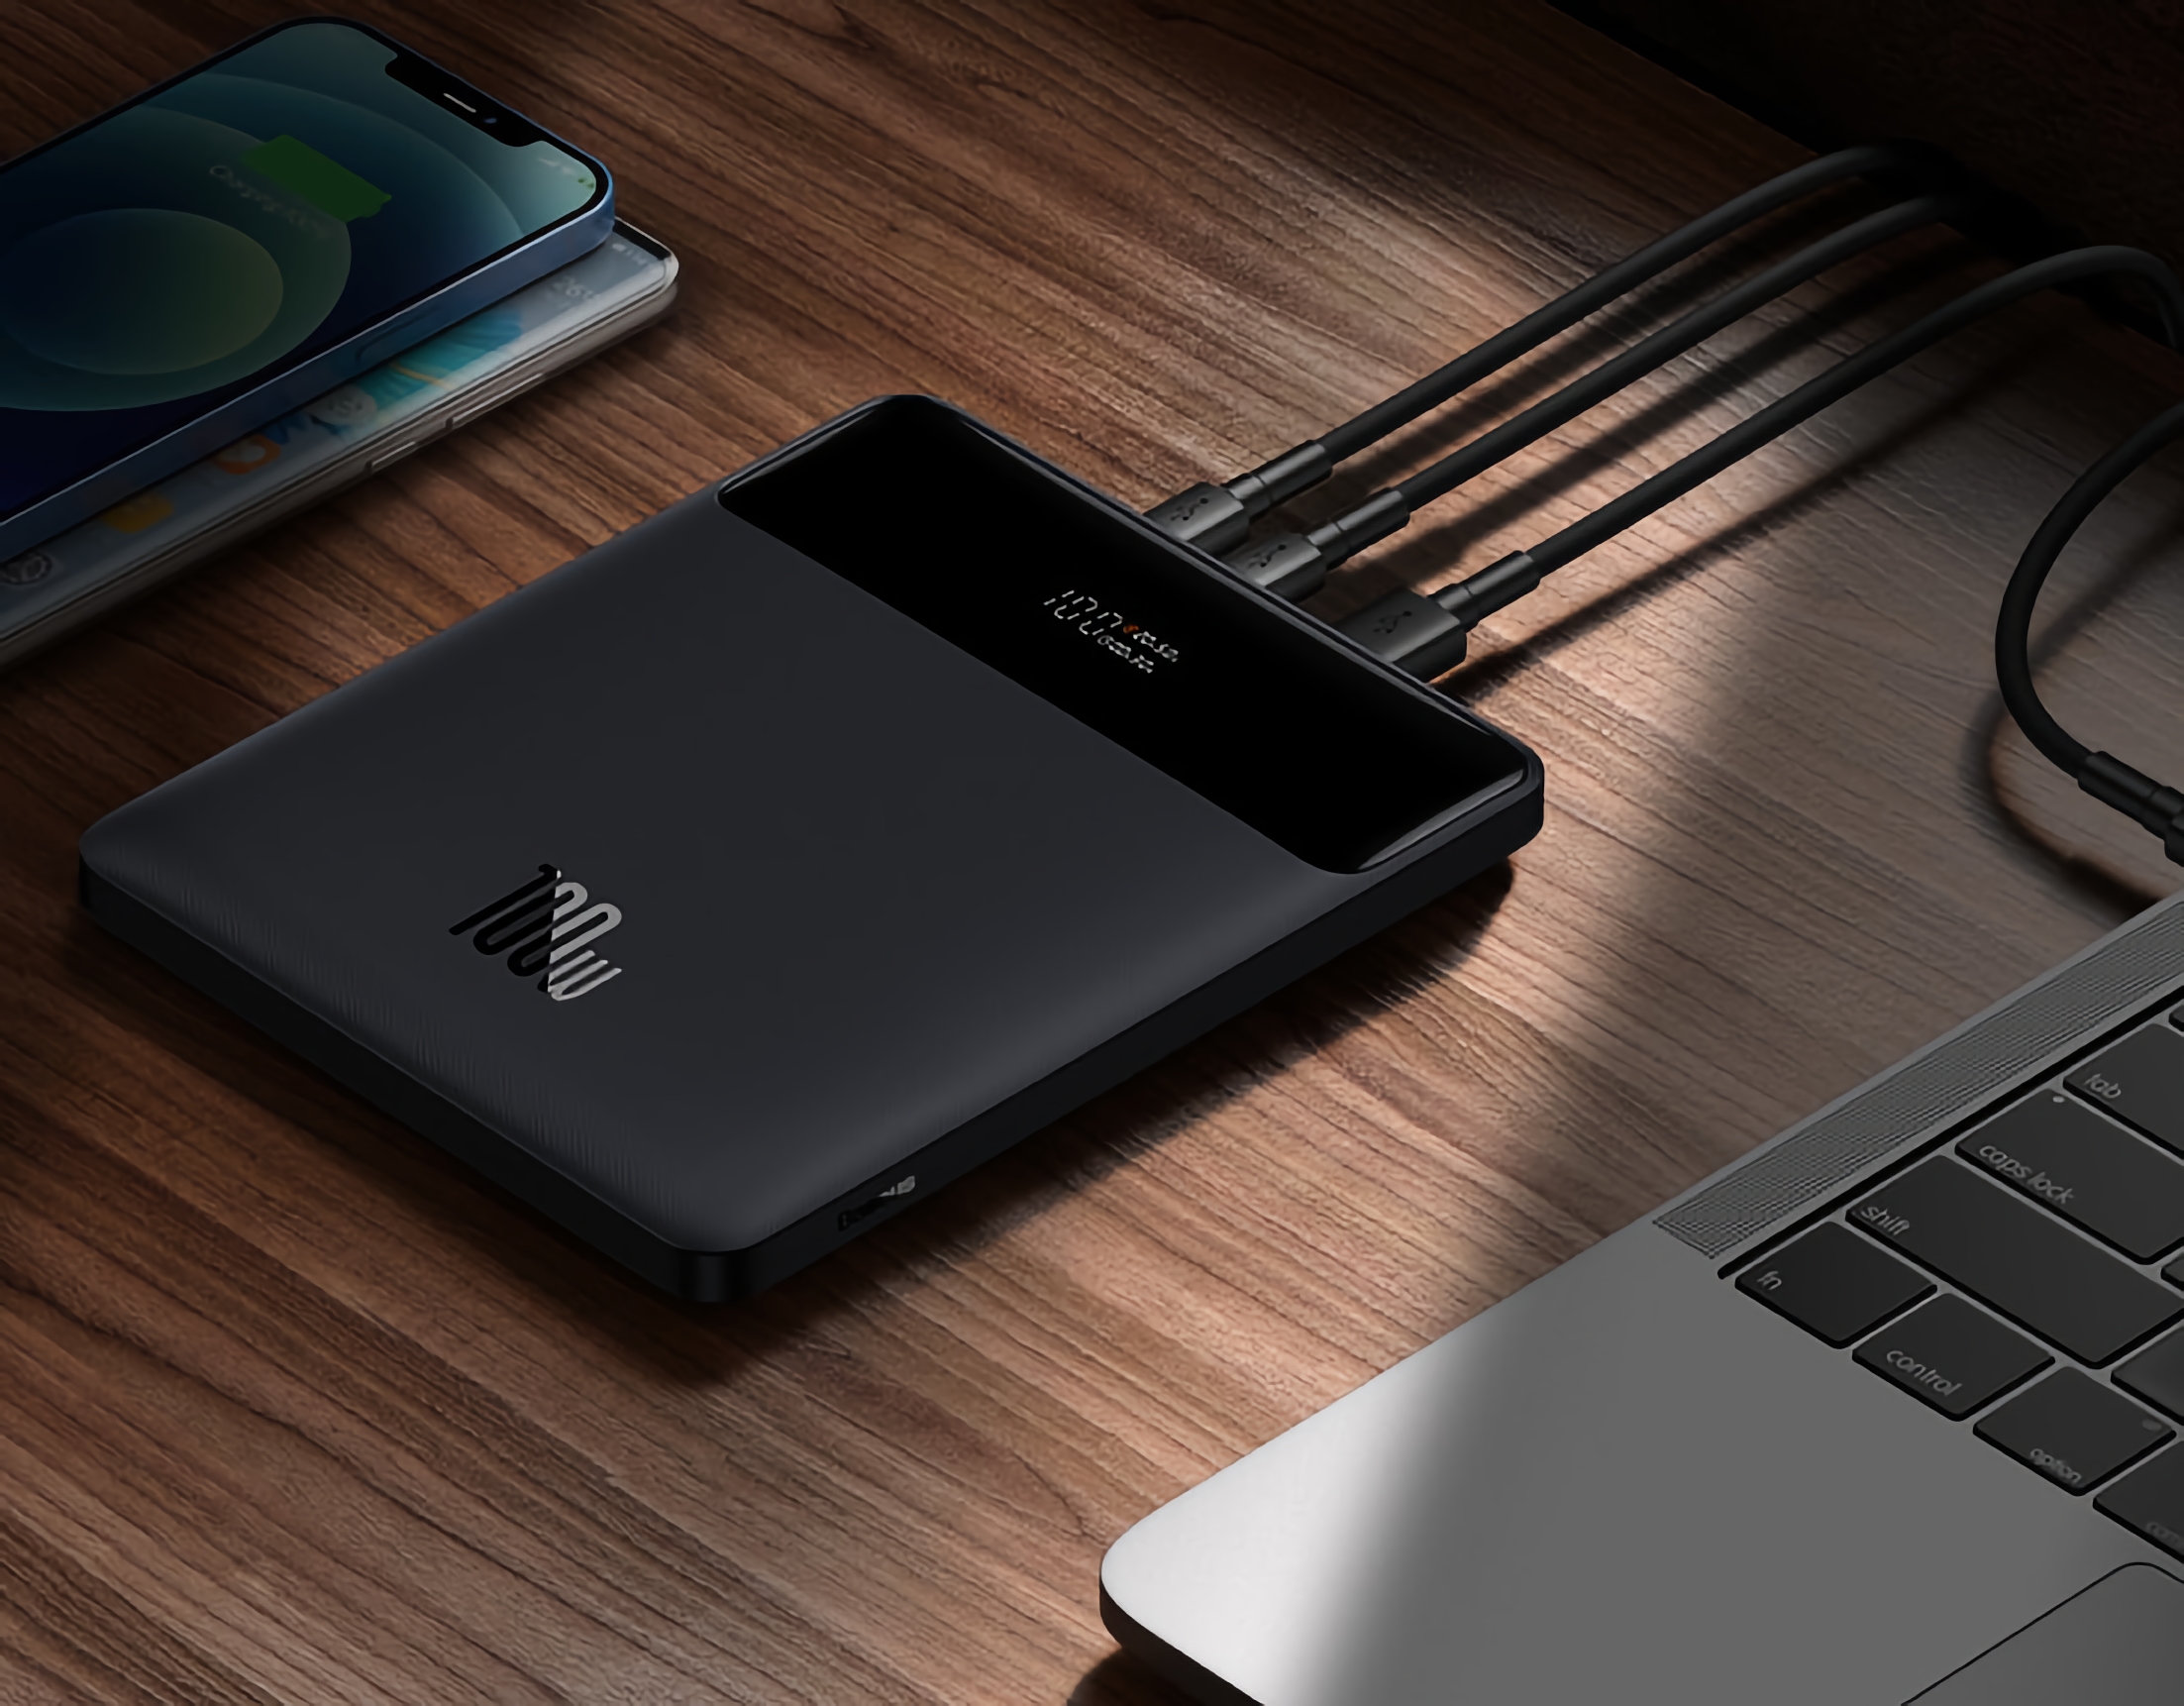 Baseus 100W: 20,000 mAh power bank for laptops, smartphones and tablets for $49